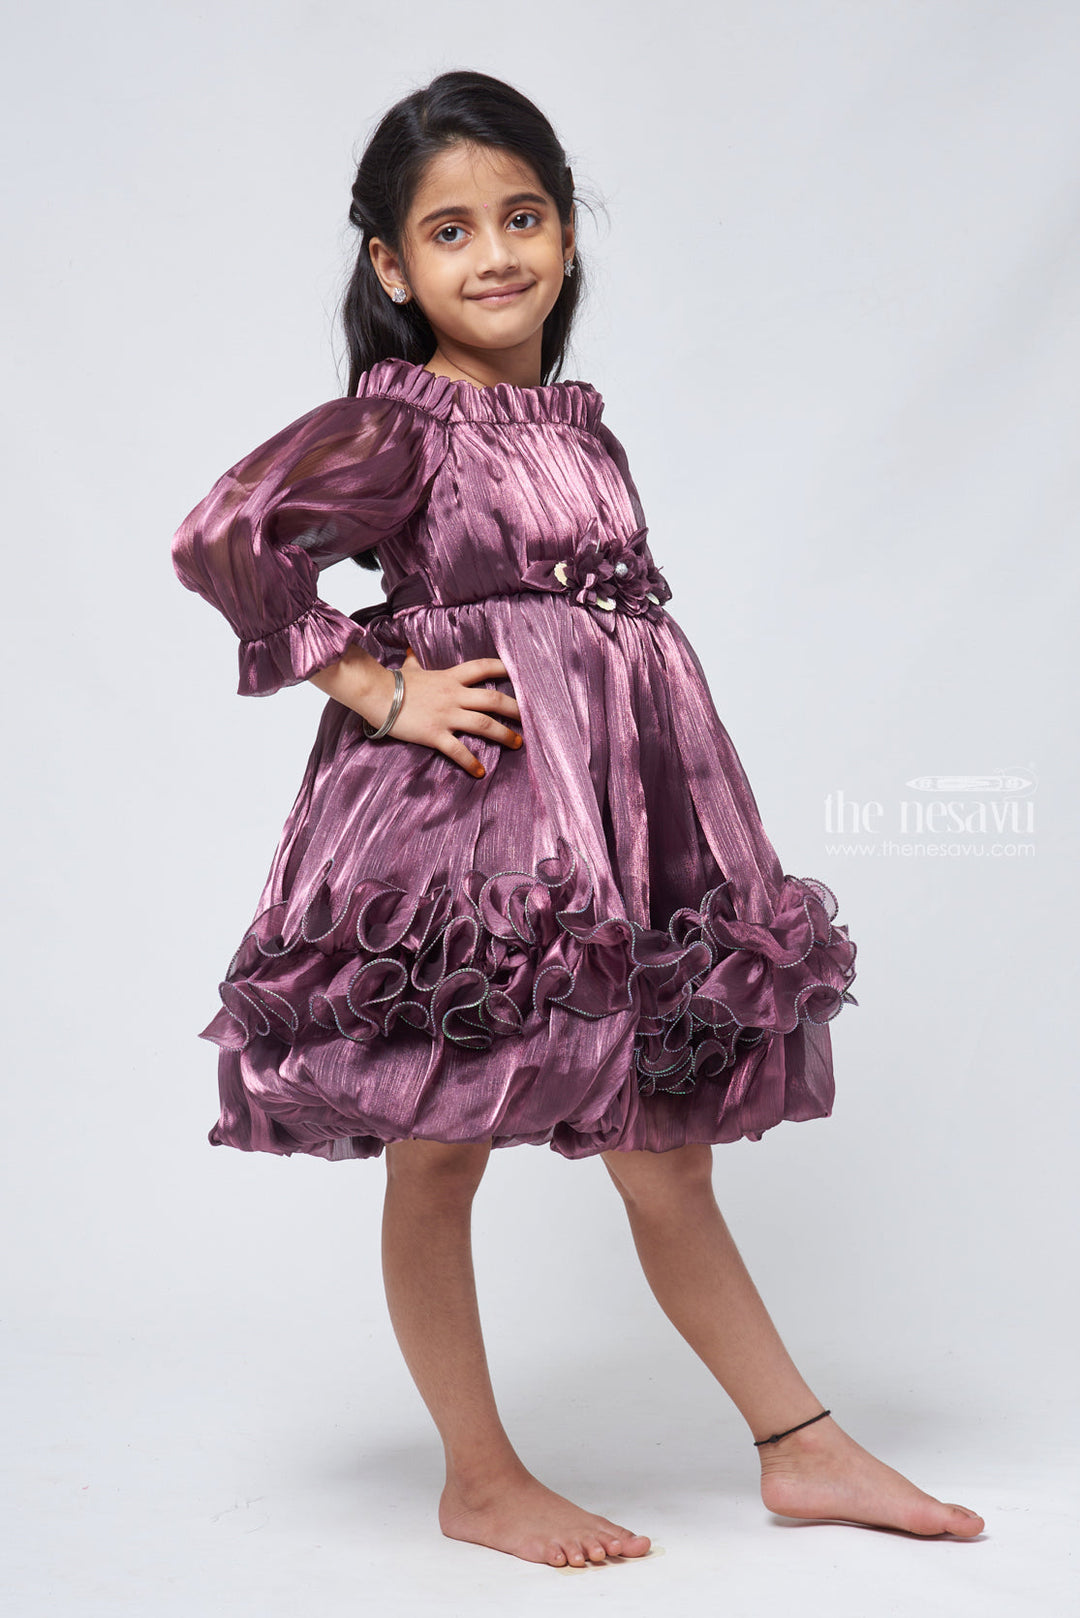 The Nesavu Girls Fancy Party Frock Elegant Party Dress for Girls Classic Design and Comfort Fit Nesavu 1st Birthday Dress Baby Girl | Baby Party Frock Birthday | The Nesavu